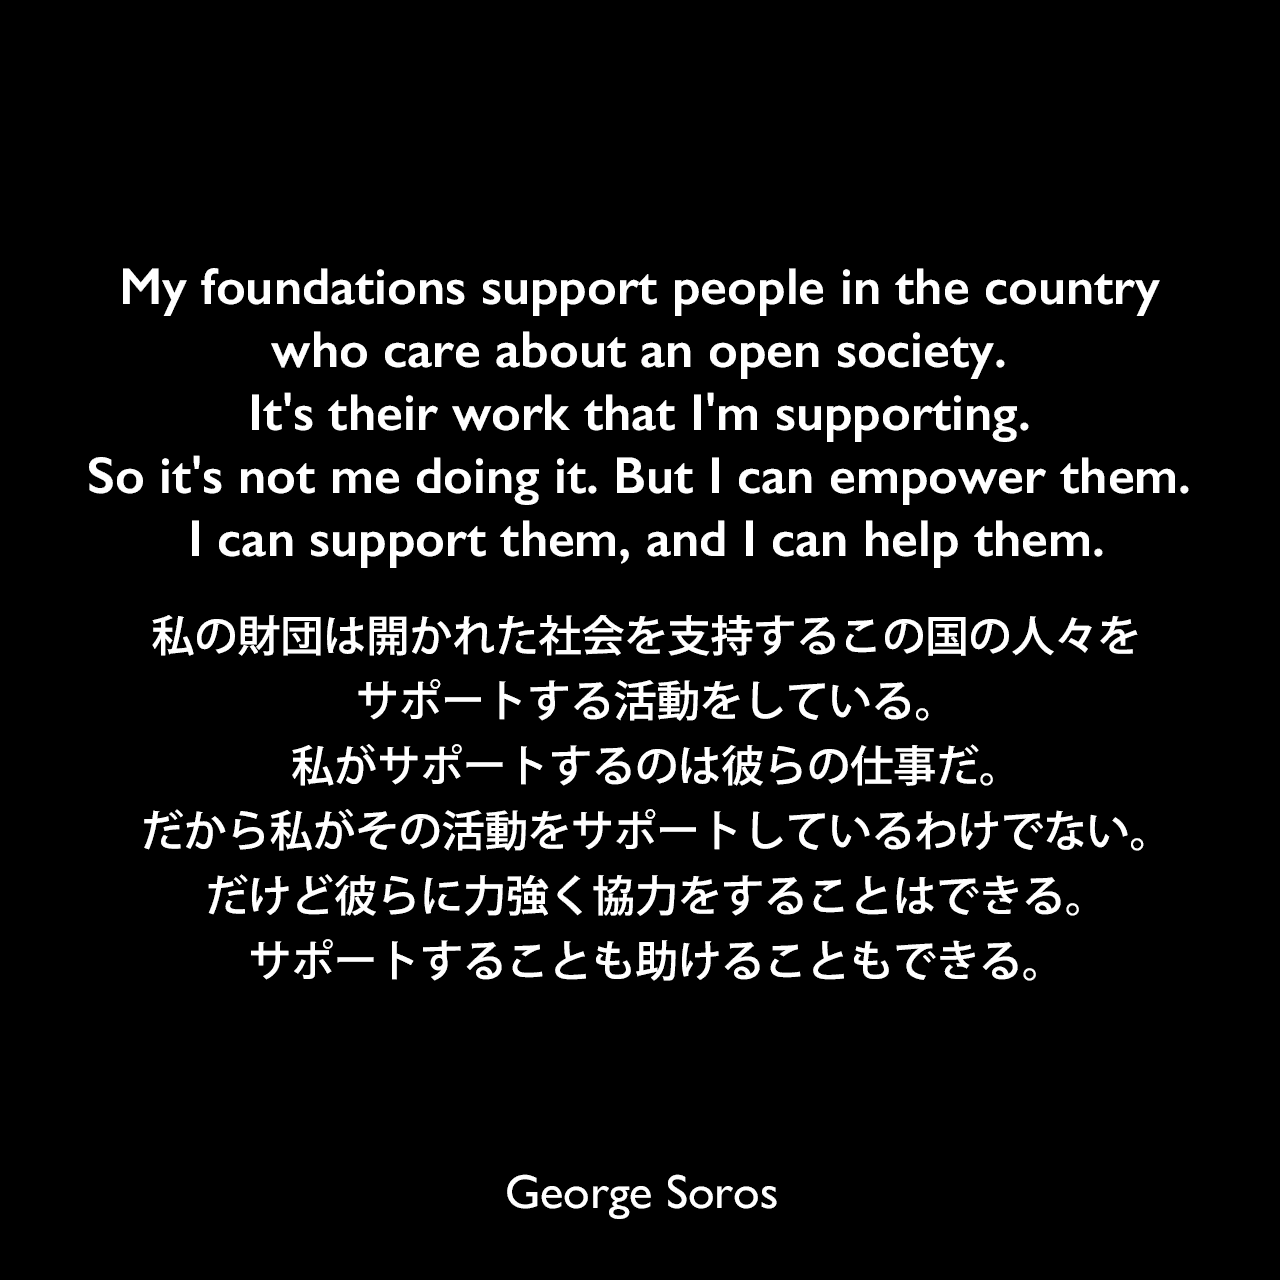 My foundations support people in the country who care about an open society. It's their work that I'm supporting. So it's not me doing it. But I can empower them. I can support them, and I can help them.私の財団は開かれた社会を支持するこの国の人々をサポートする活動をしている。私がサポートするのは彼らの仕事だ。だから私がその活動をサポートしているわけでない。だけど彼らに力強く協力をすることはできる。サポートすることも助けることもできる。George Soros